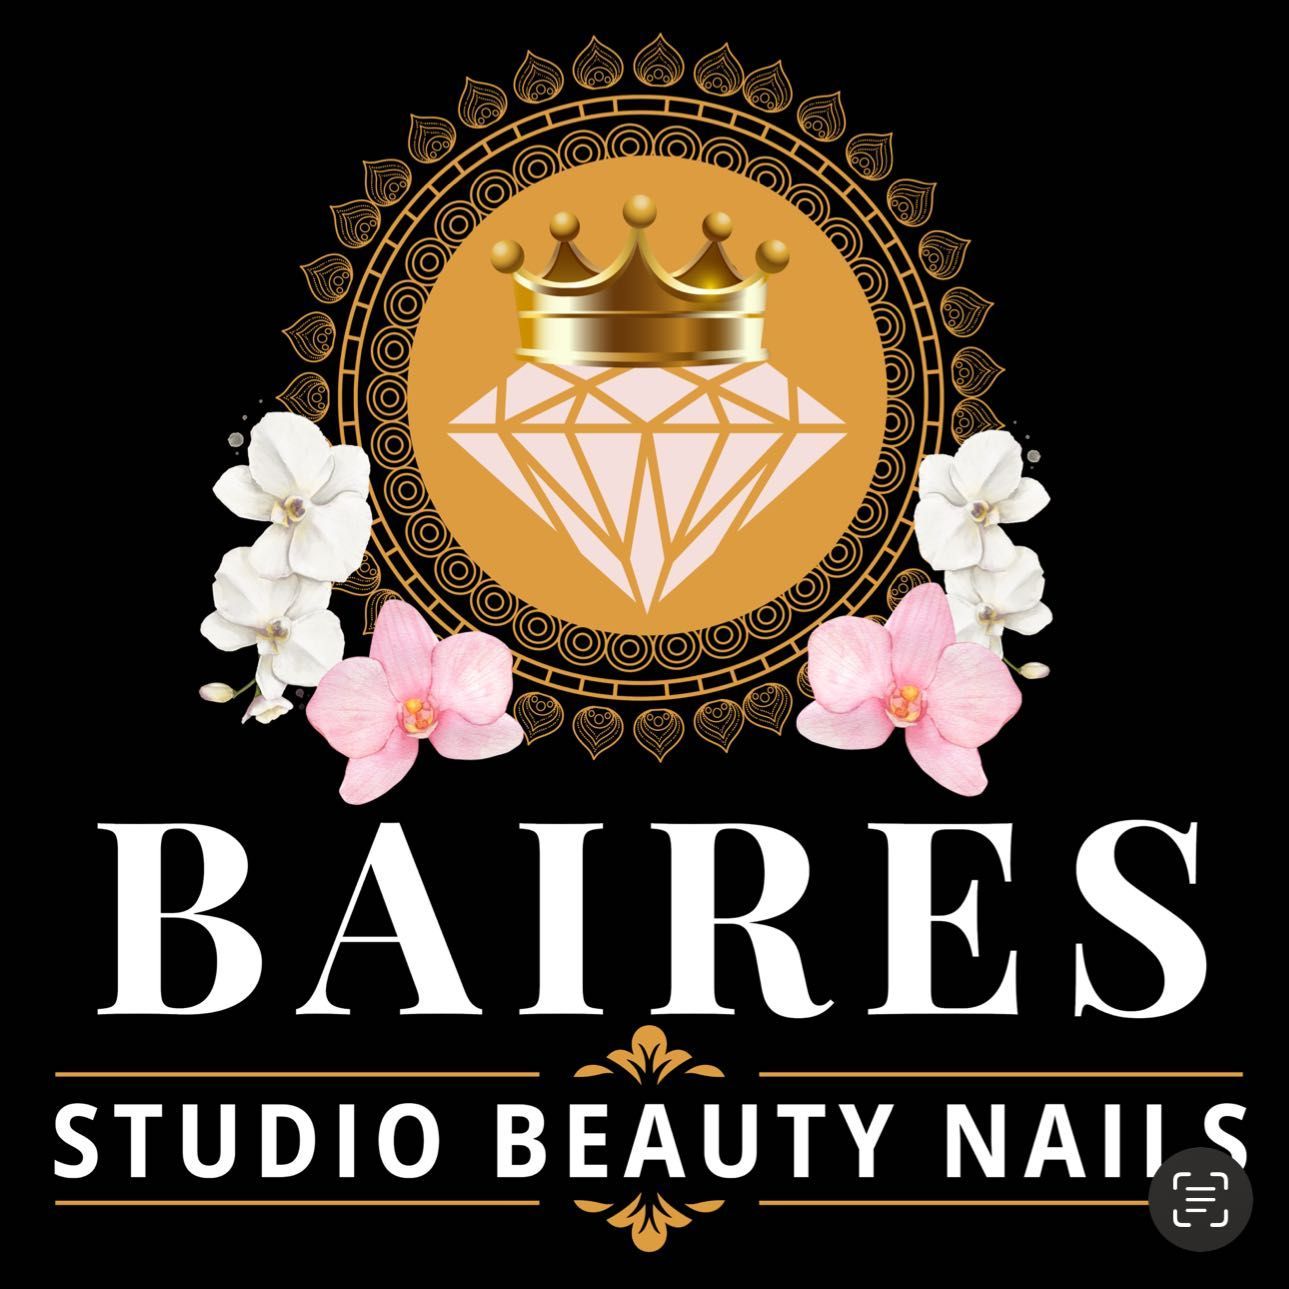 Baires studio beauty nails, 63 Watchung Ave, North Plainfield, 07060